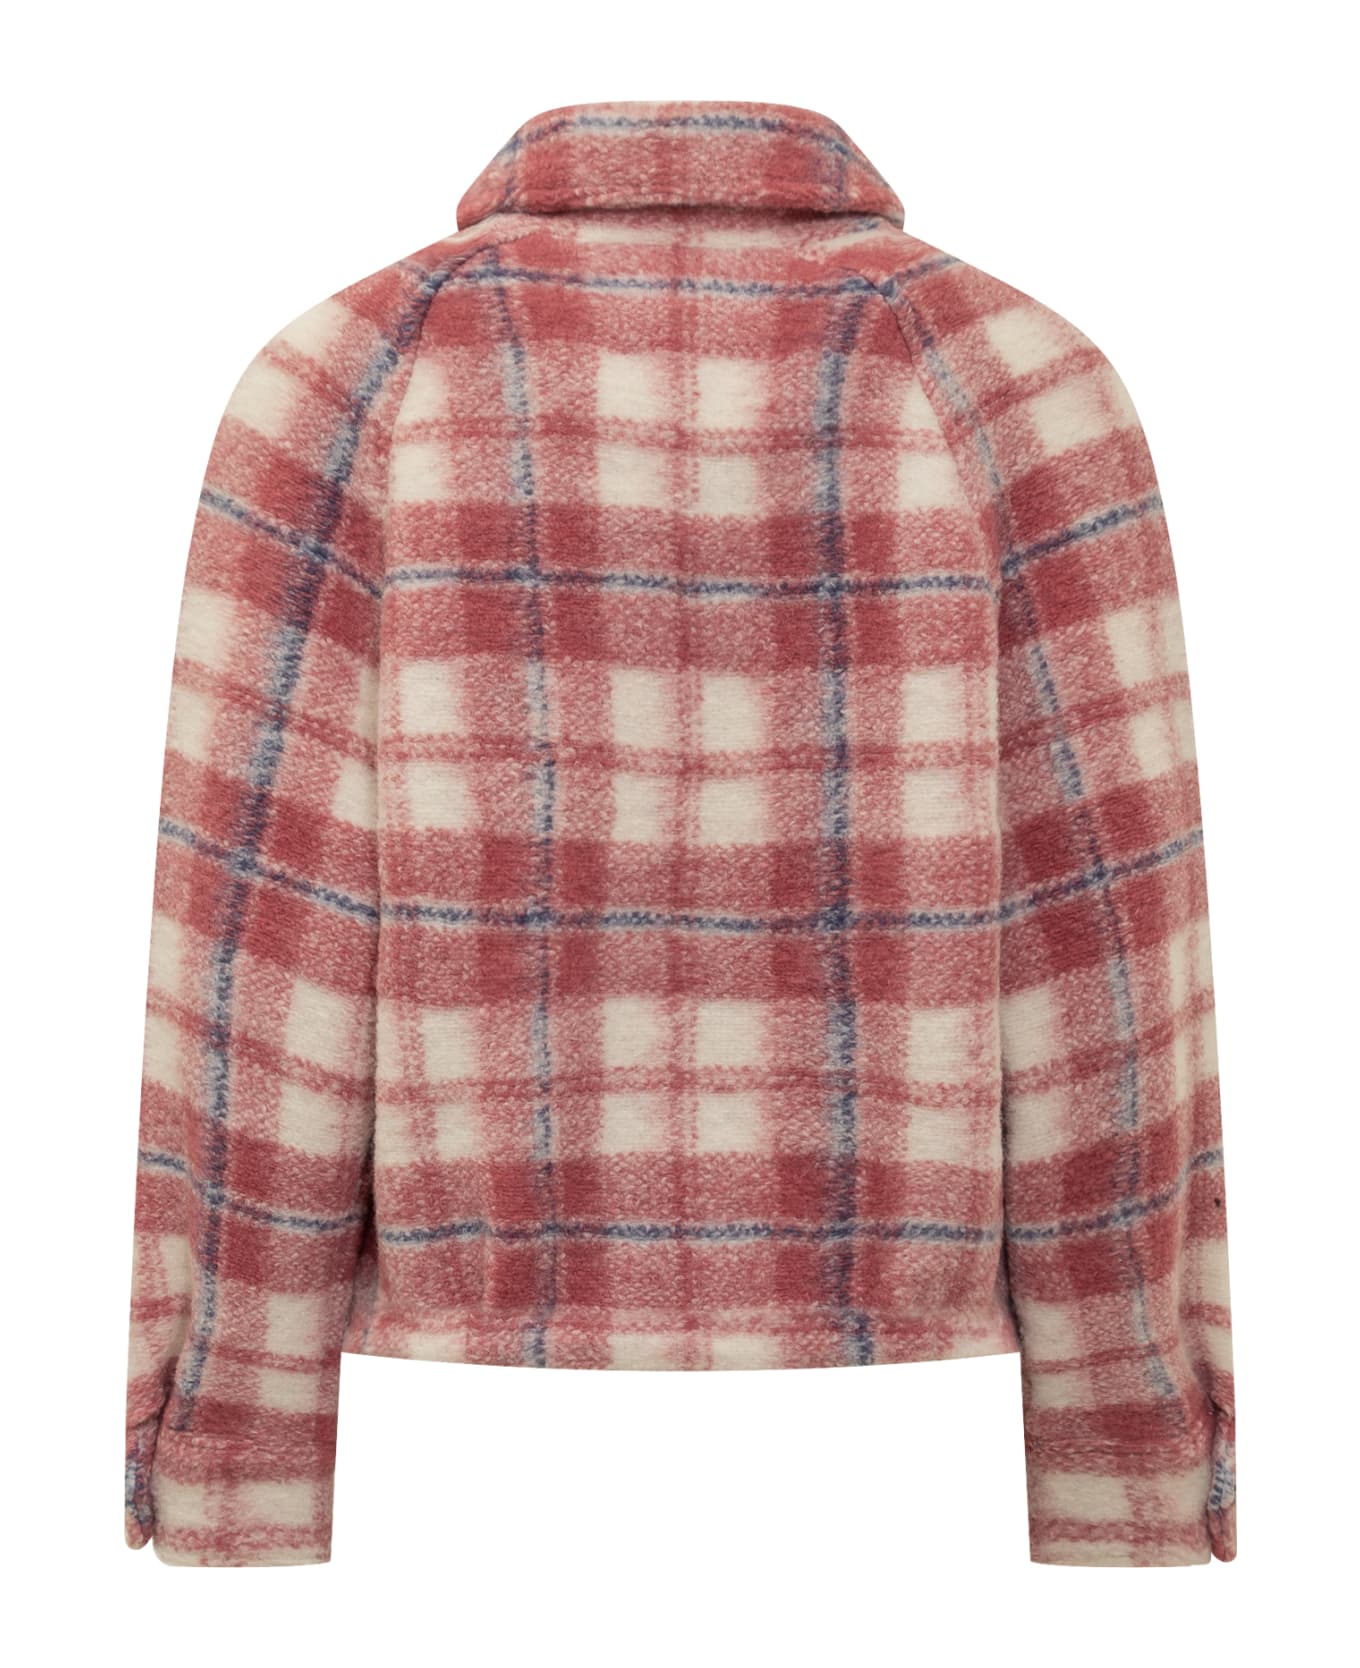 Woolrich Gentry Jacket - DRY ROSE CHECK